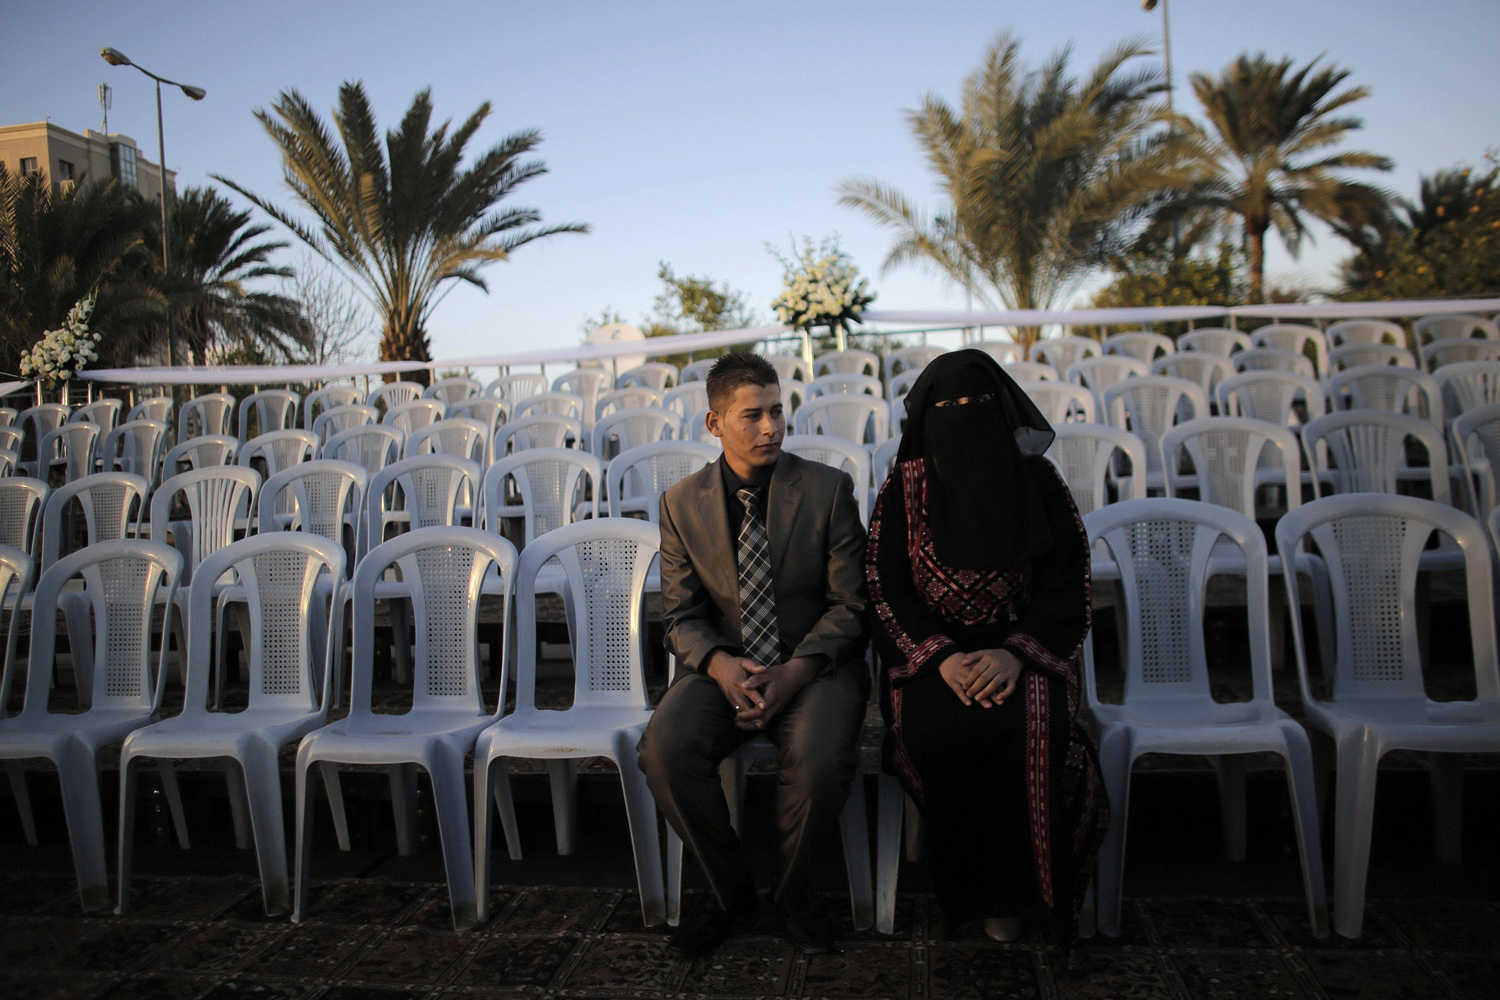 A Palestinian couple waits before a mass wedding ceremony in the West Bank city of Jericho